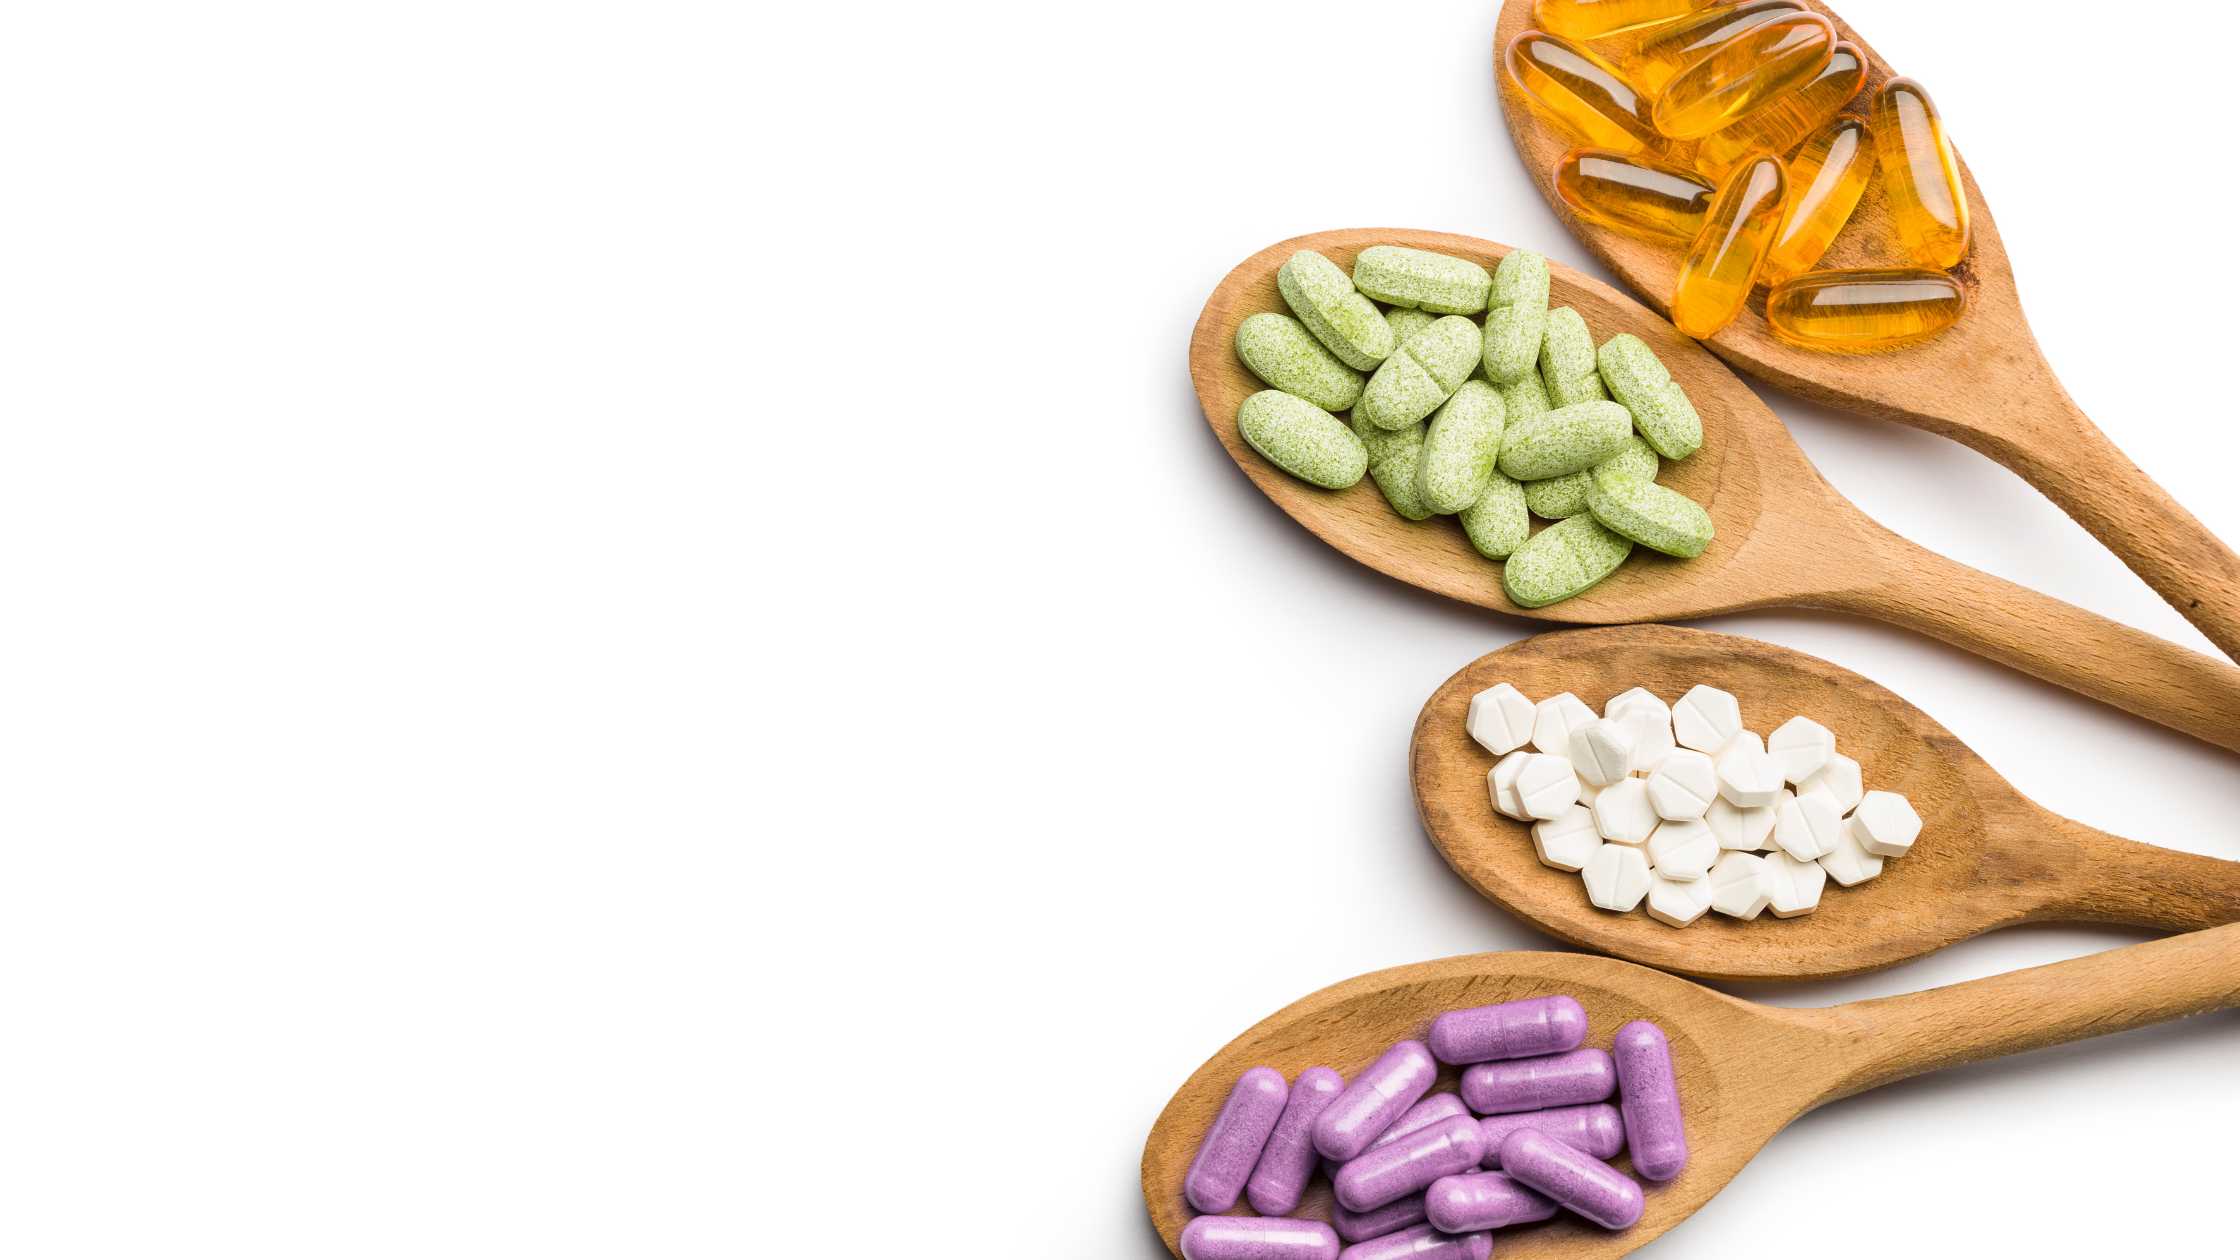 What Are the Benefits of Taking an NMN Supplement?